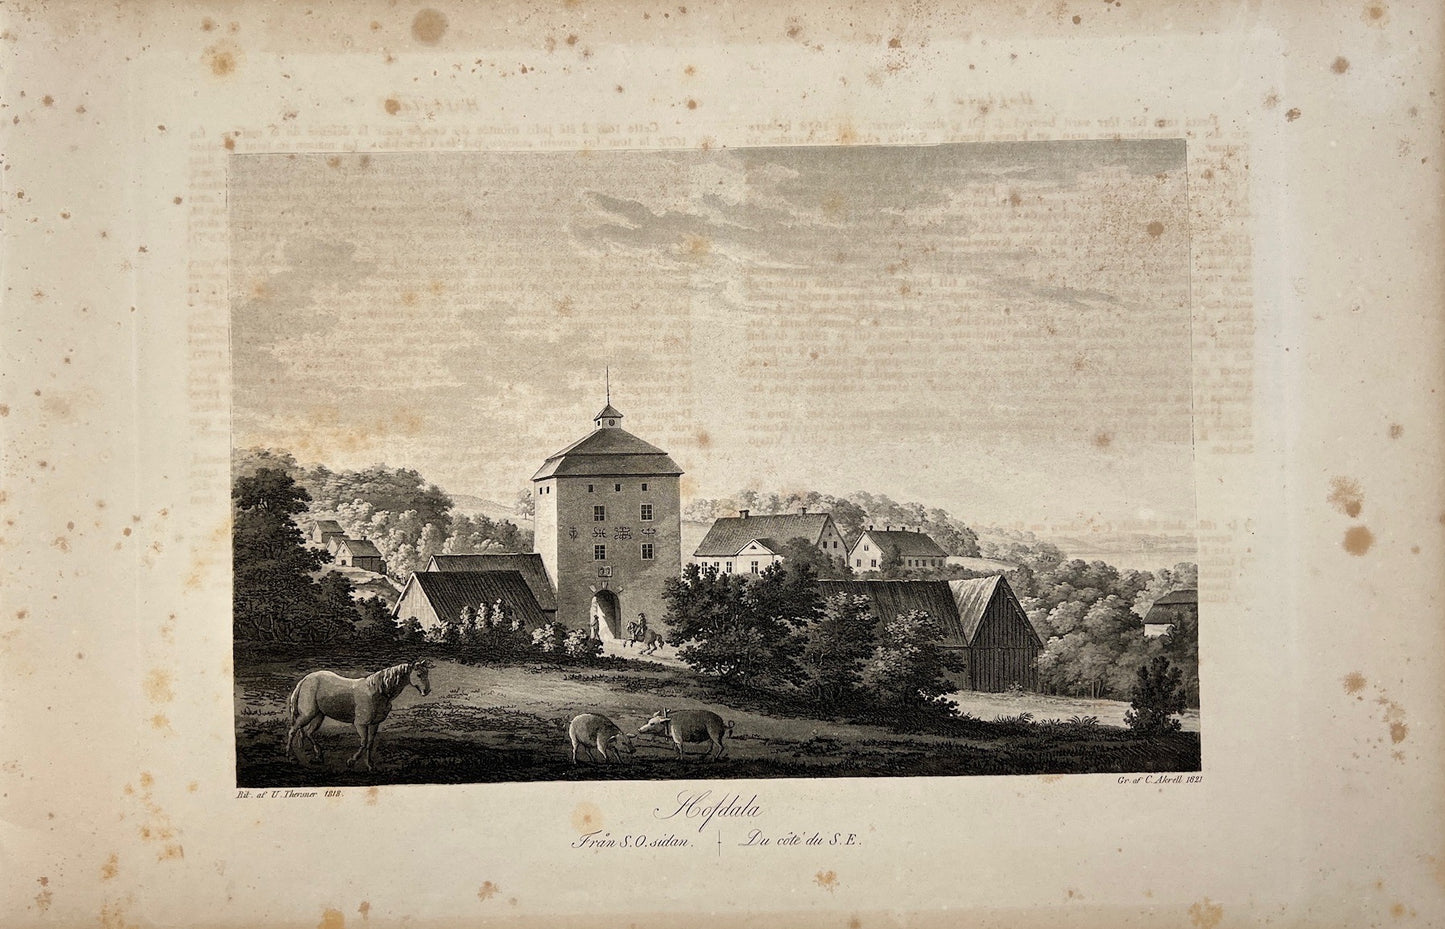 Antique Print - View of Hovdala Castle - Hassleholm Municipality - Skania - 1828